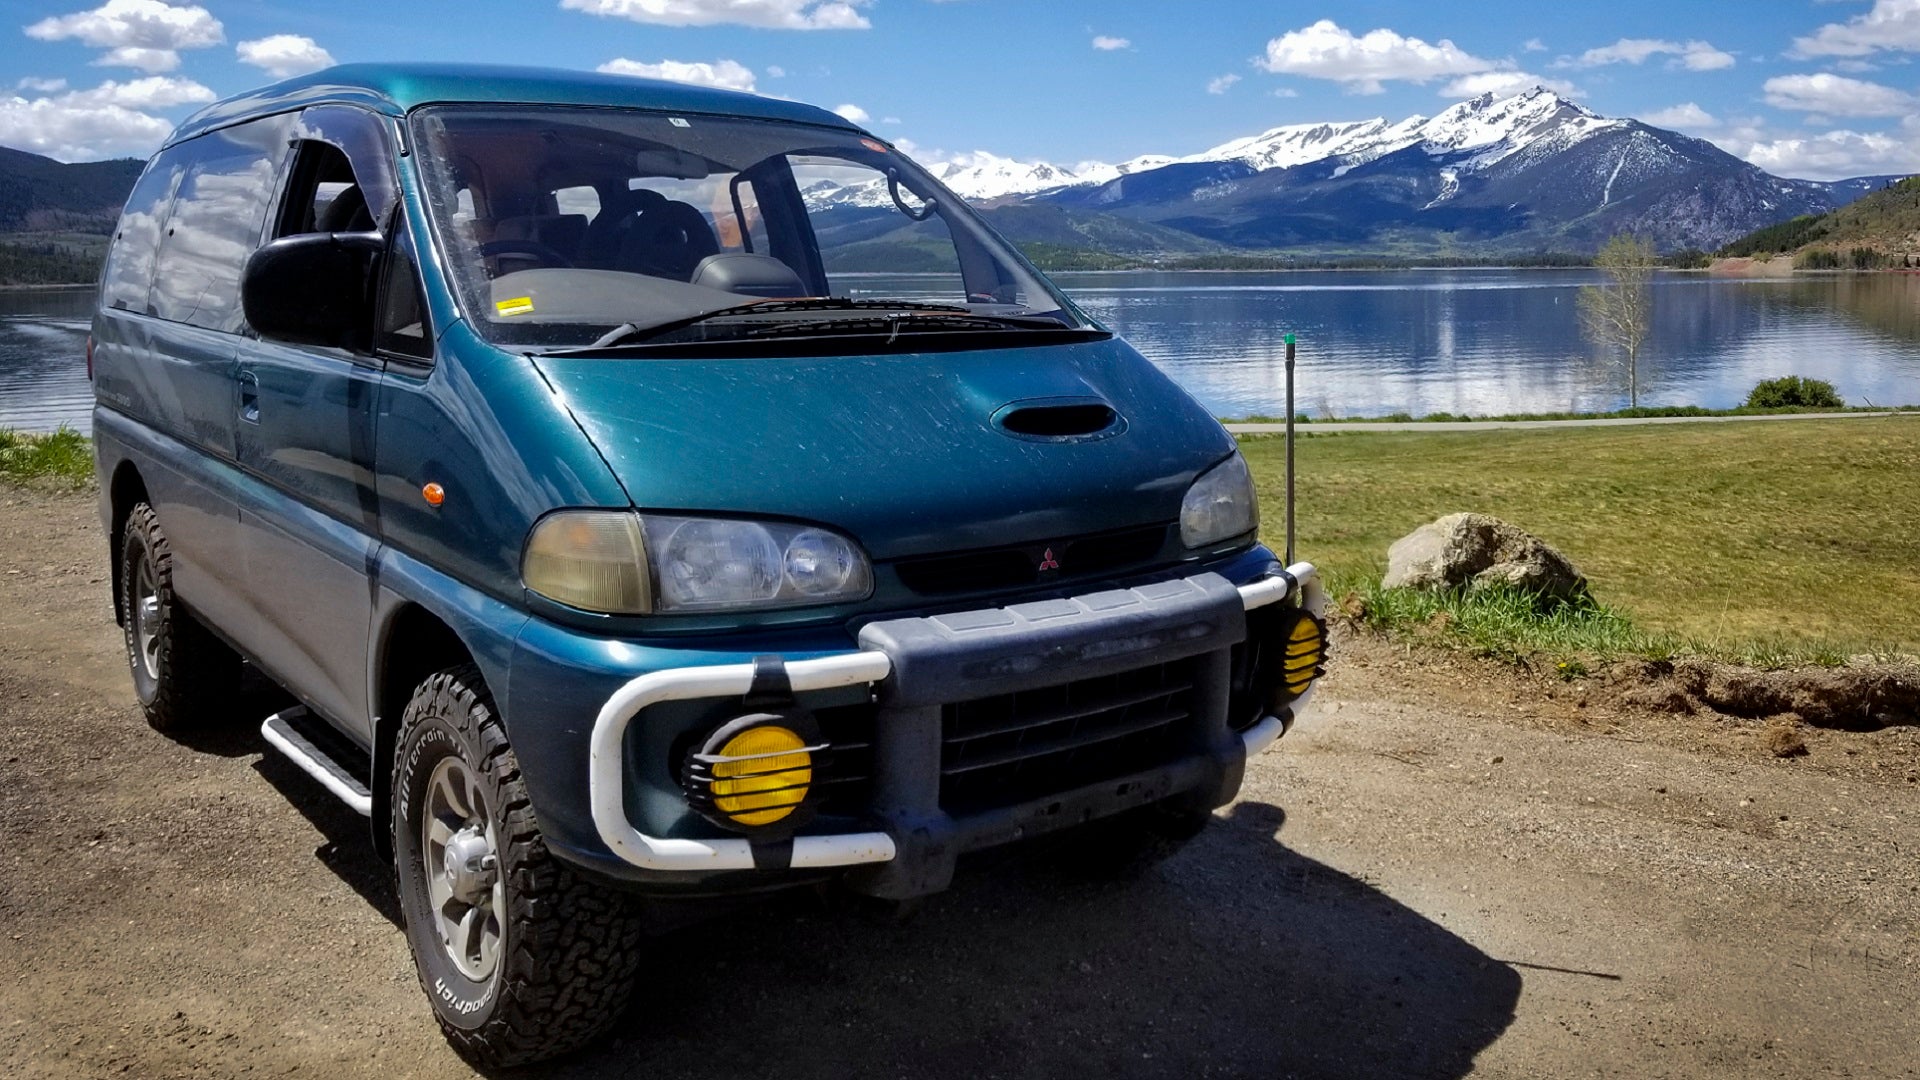 This 4WD Diesel Powered Mitsubishi Delica Van Has a Manual and Is 